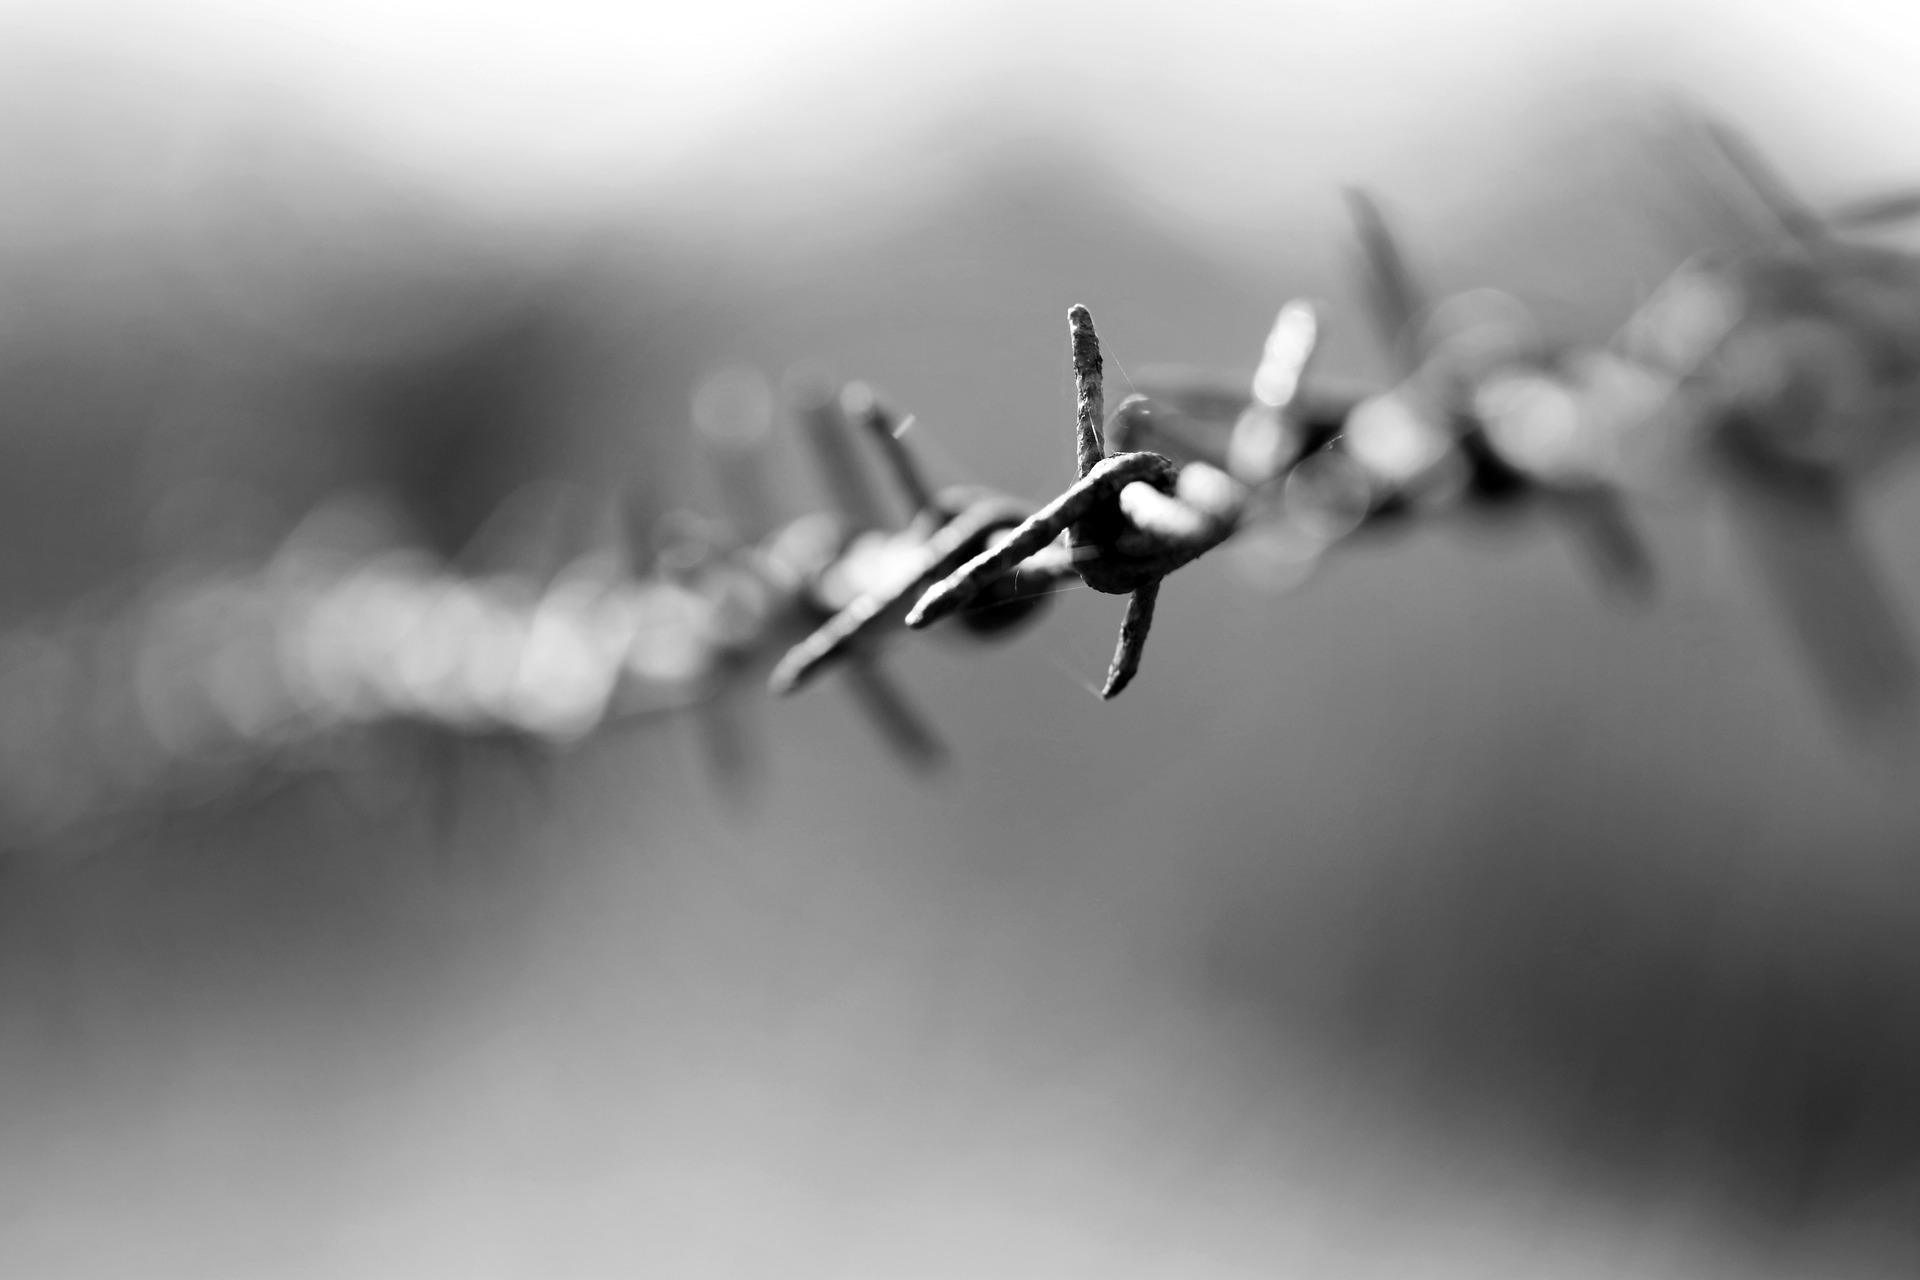 barbed-wire-g39d9f2f79_1920.jpg